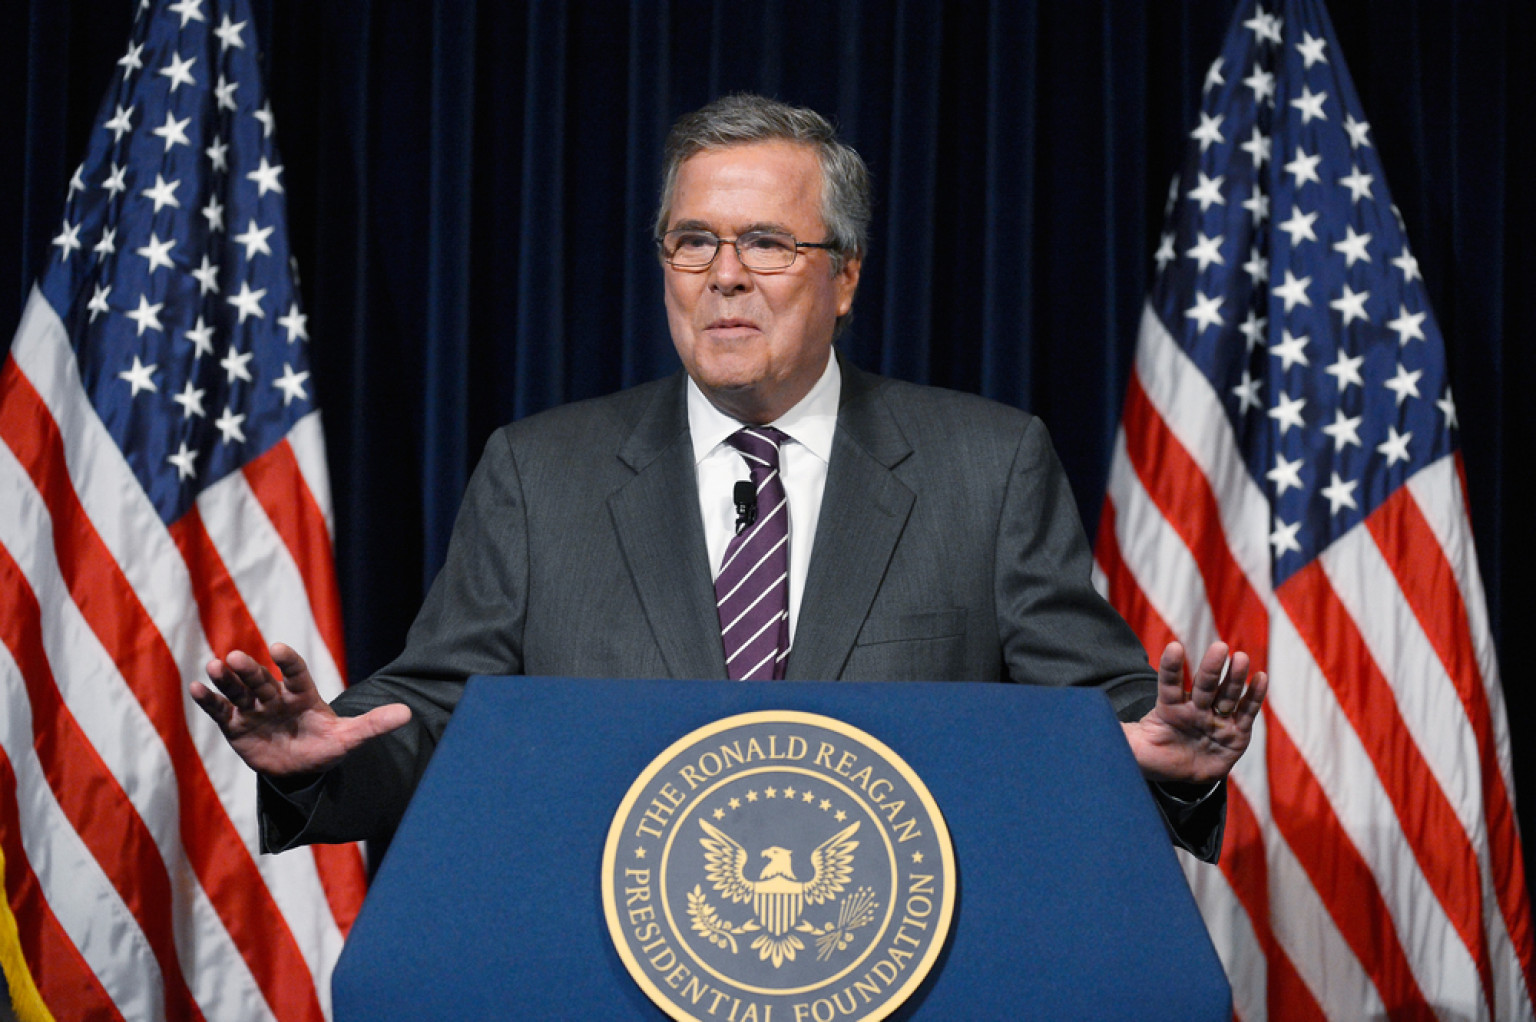 Jeb Bush A Formidable Candidate For President Huffpost